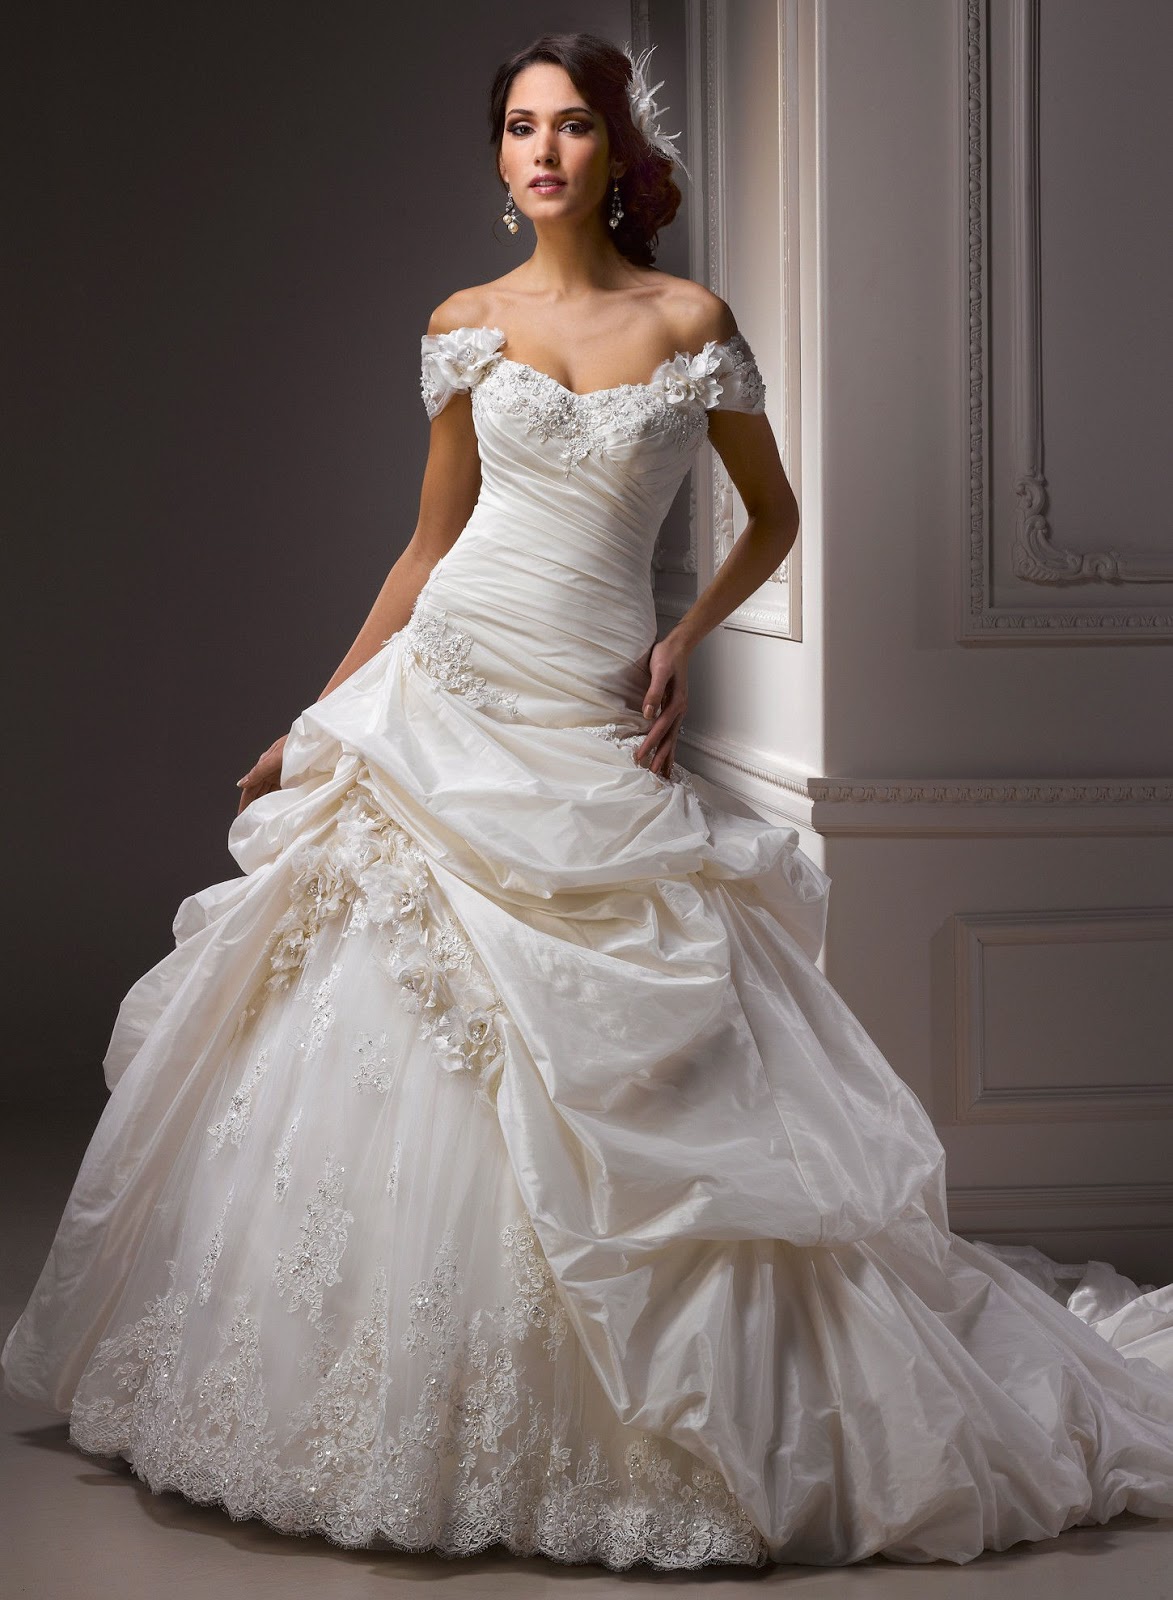 Top Simple Wedding Dresses Under 100 in 2023 The ultimate guide 